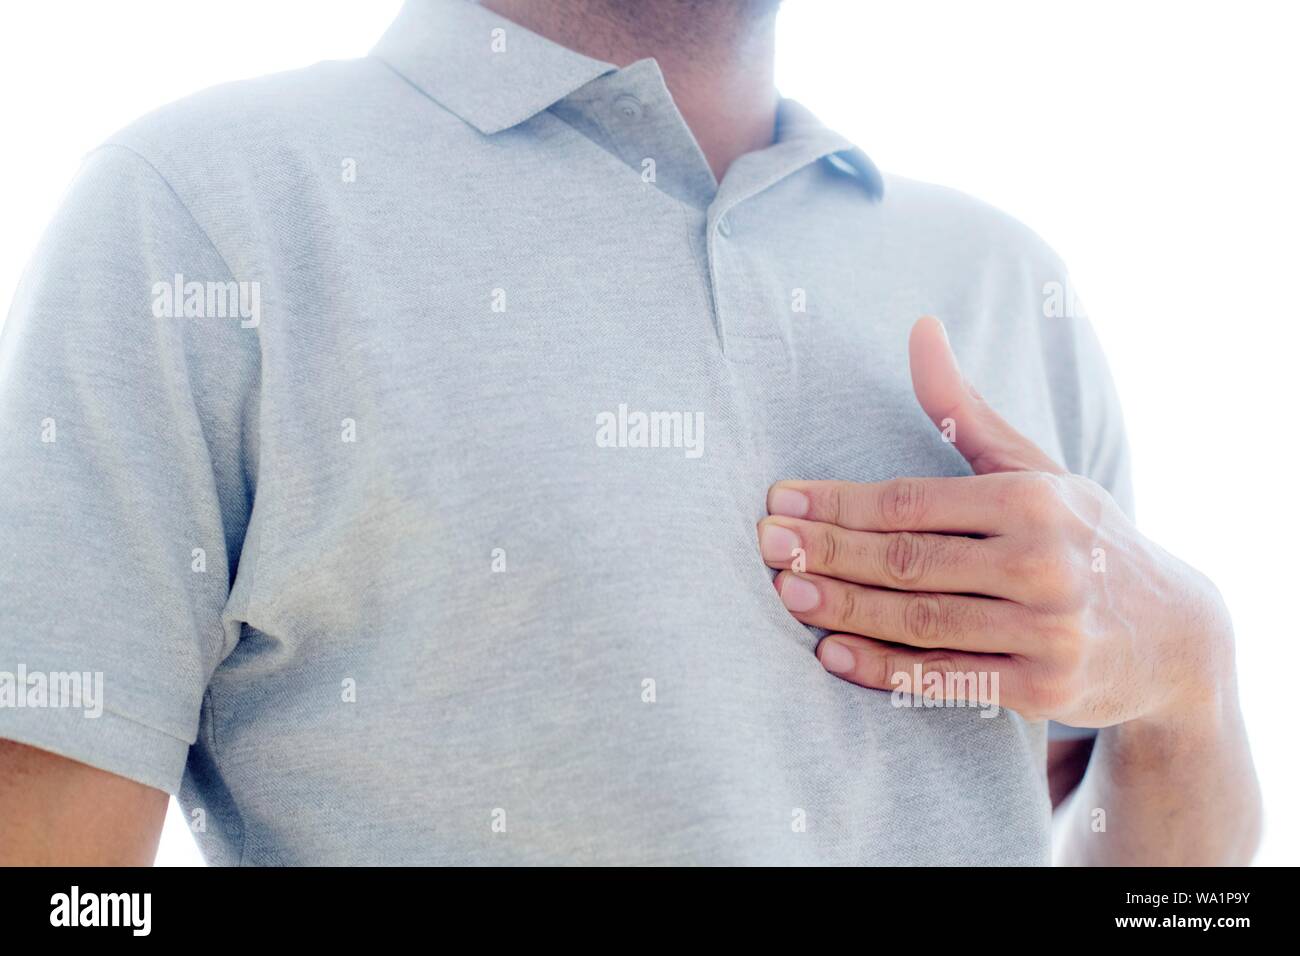 Man touching his chest in pain. Stock Photo